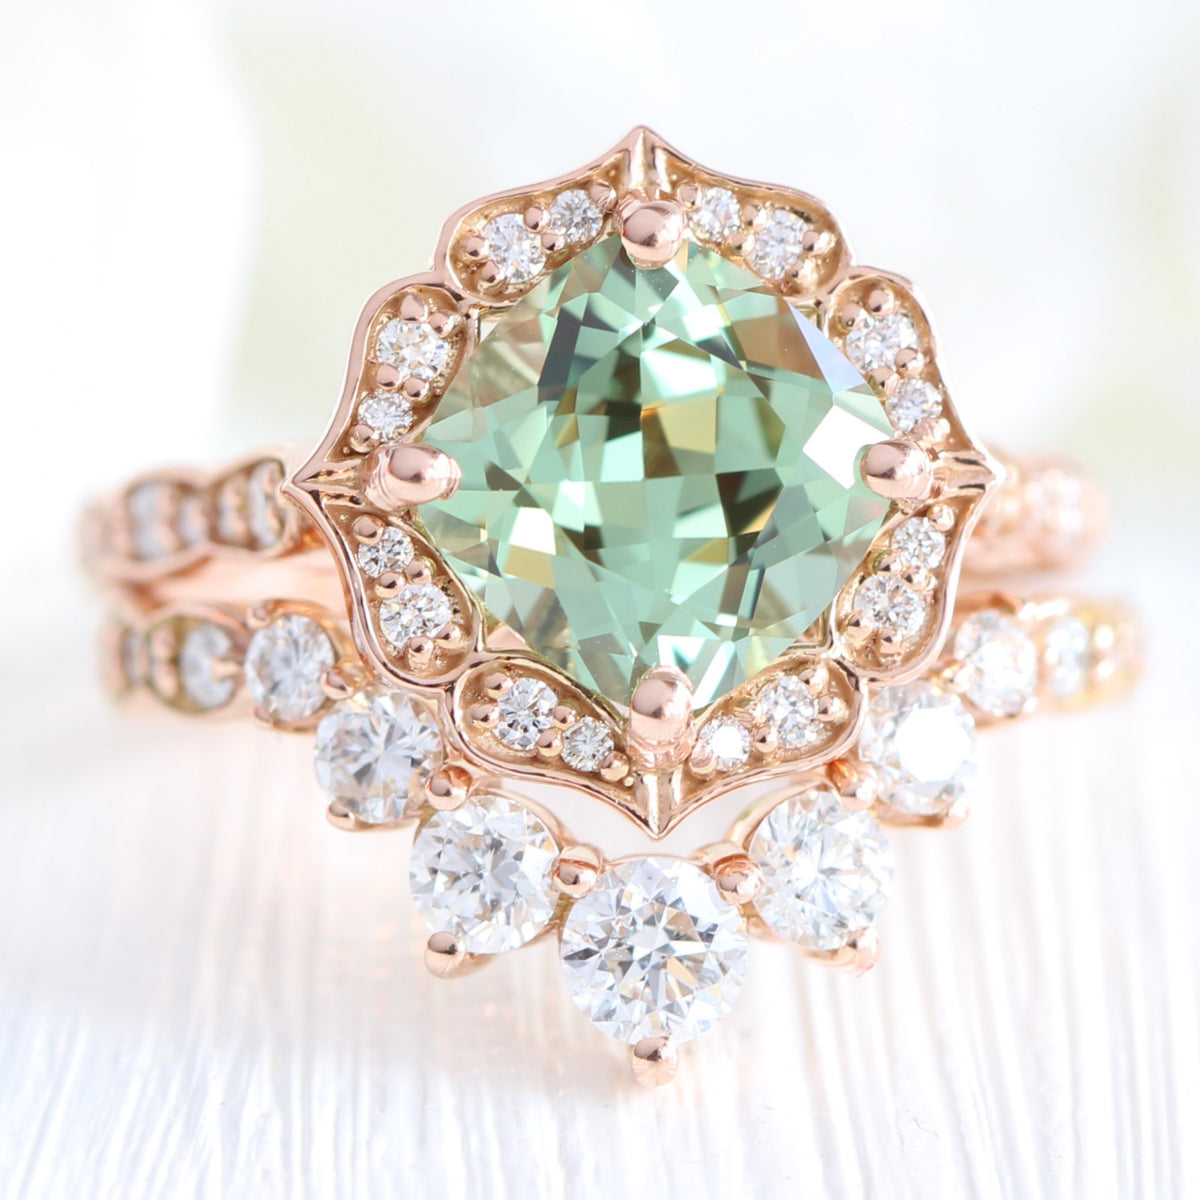 Large cushion green sapphire ring rose gold deep curved diamond wedding band la more design jewelry